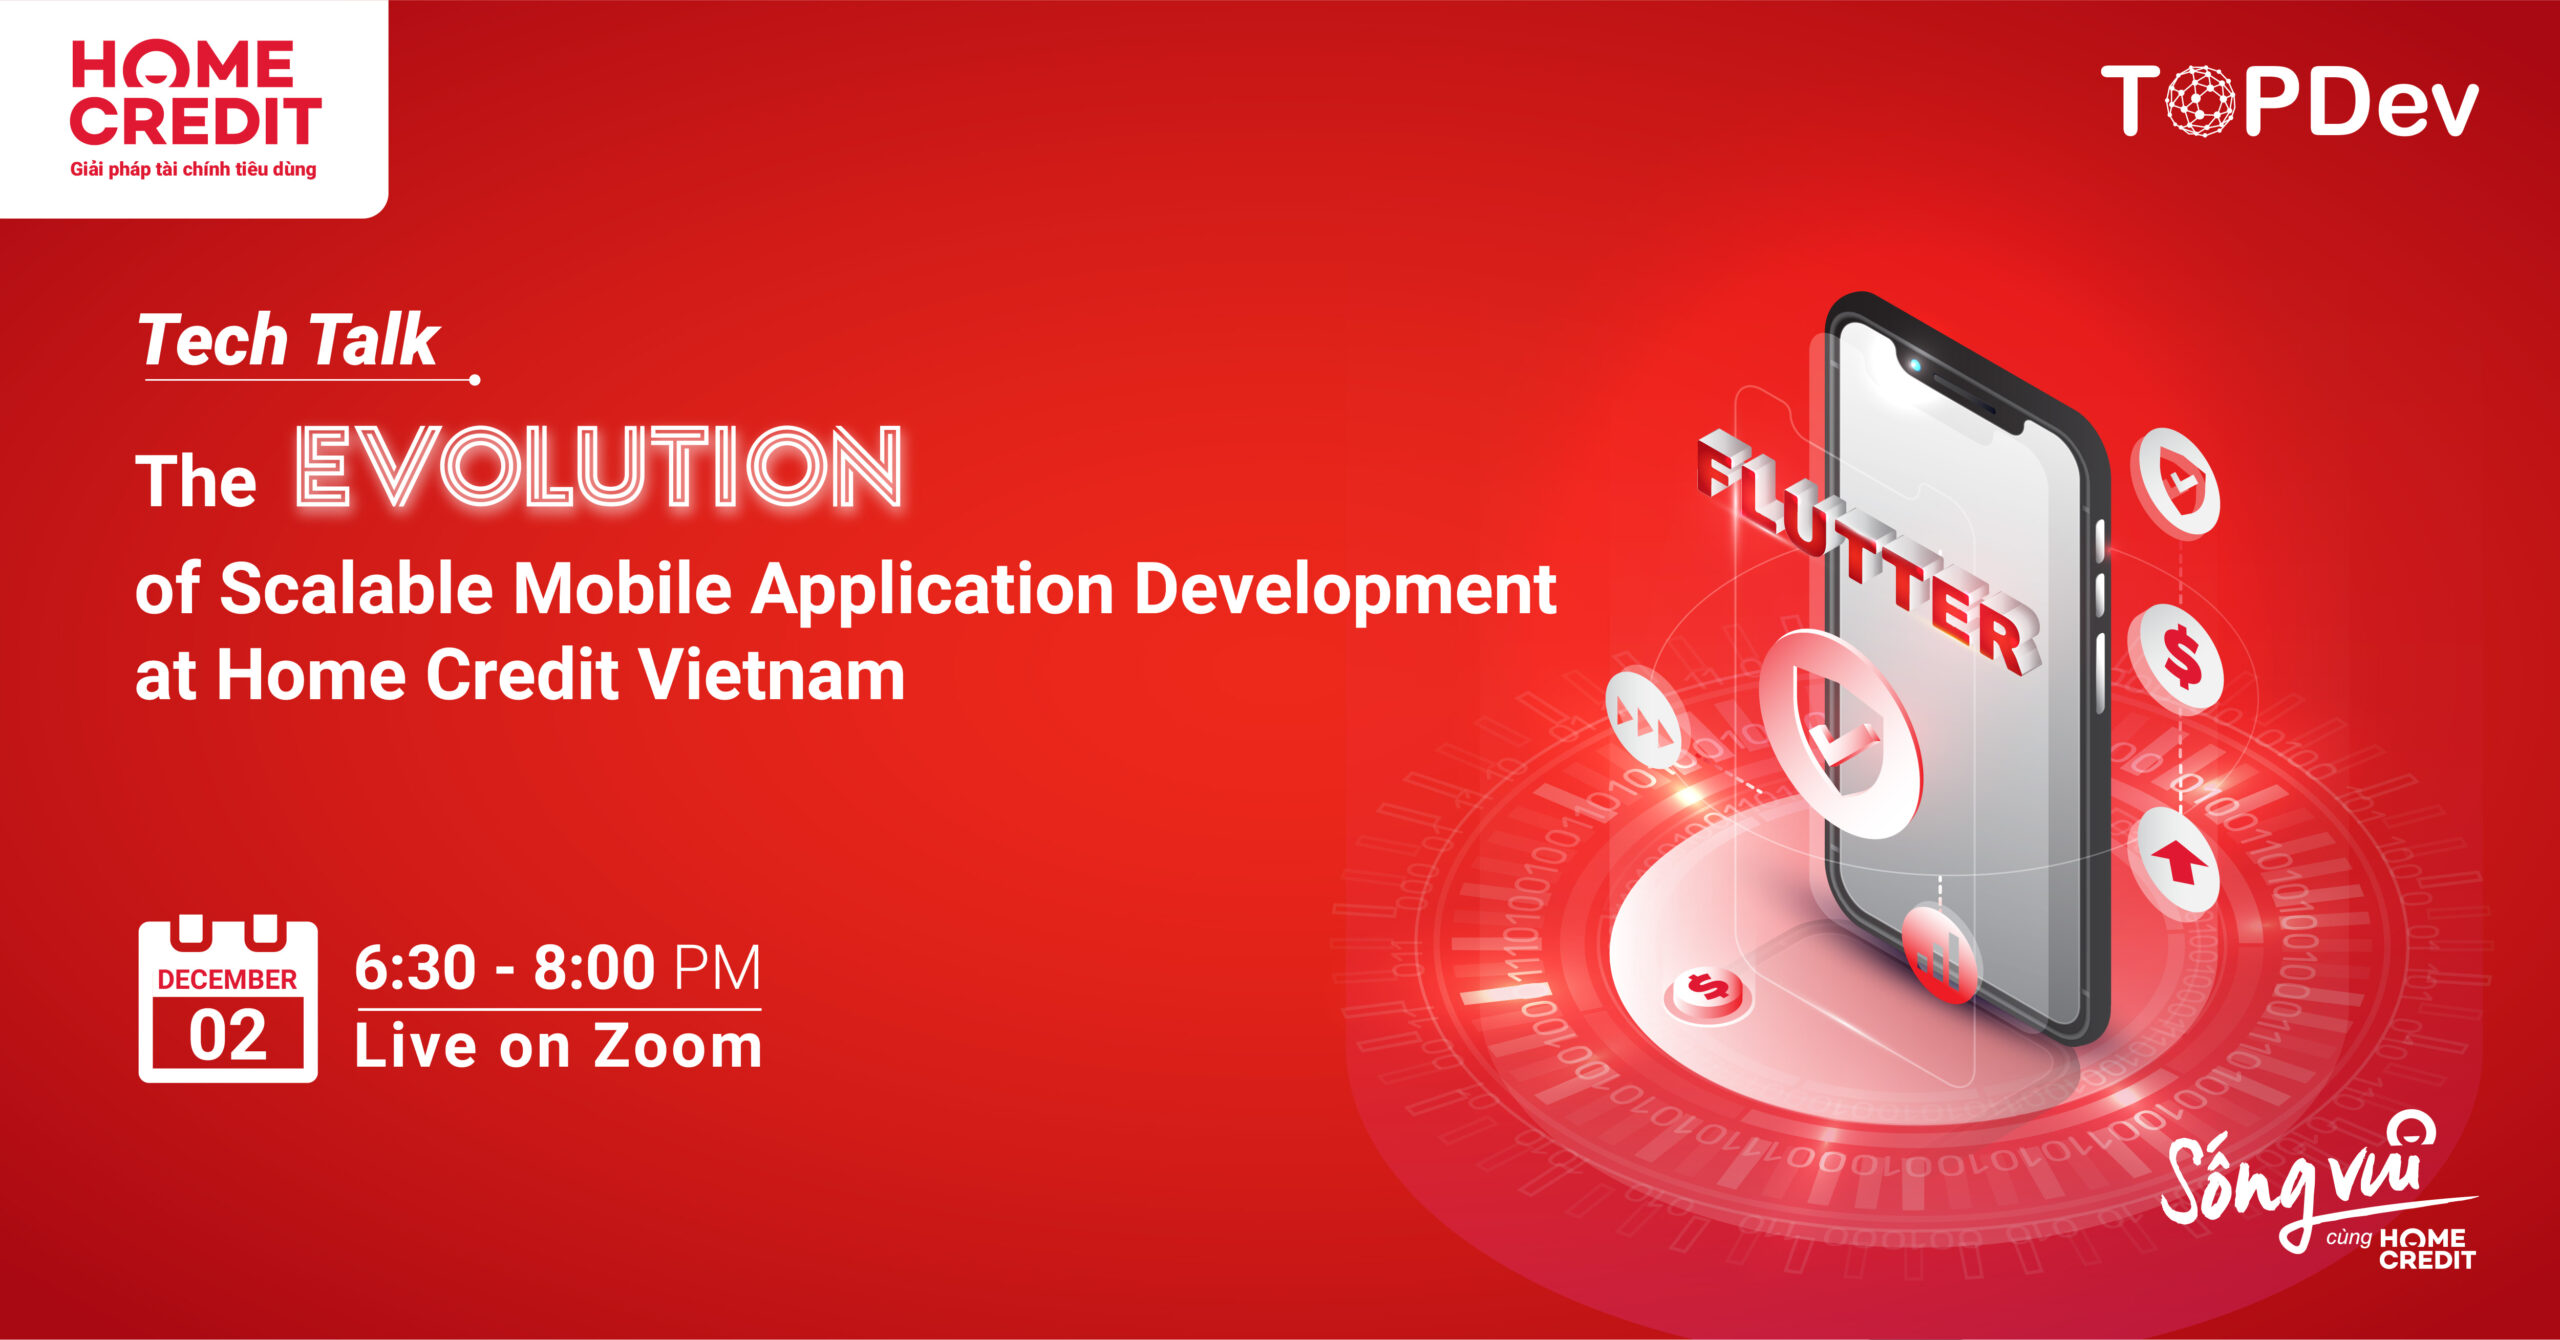 Tech Talk: The Evolution of Scalable Mobile Application Development at Home Credit Vietnam